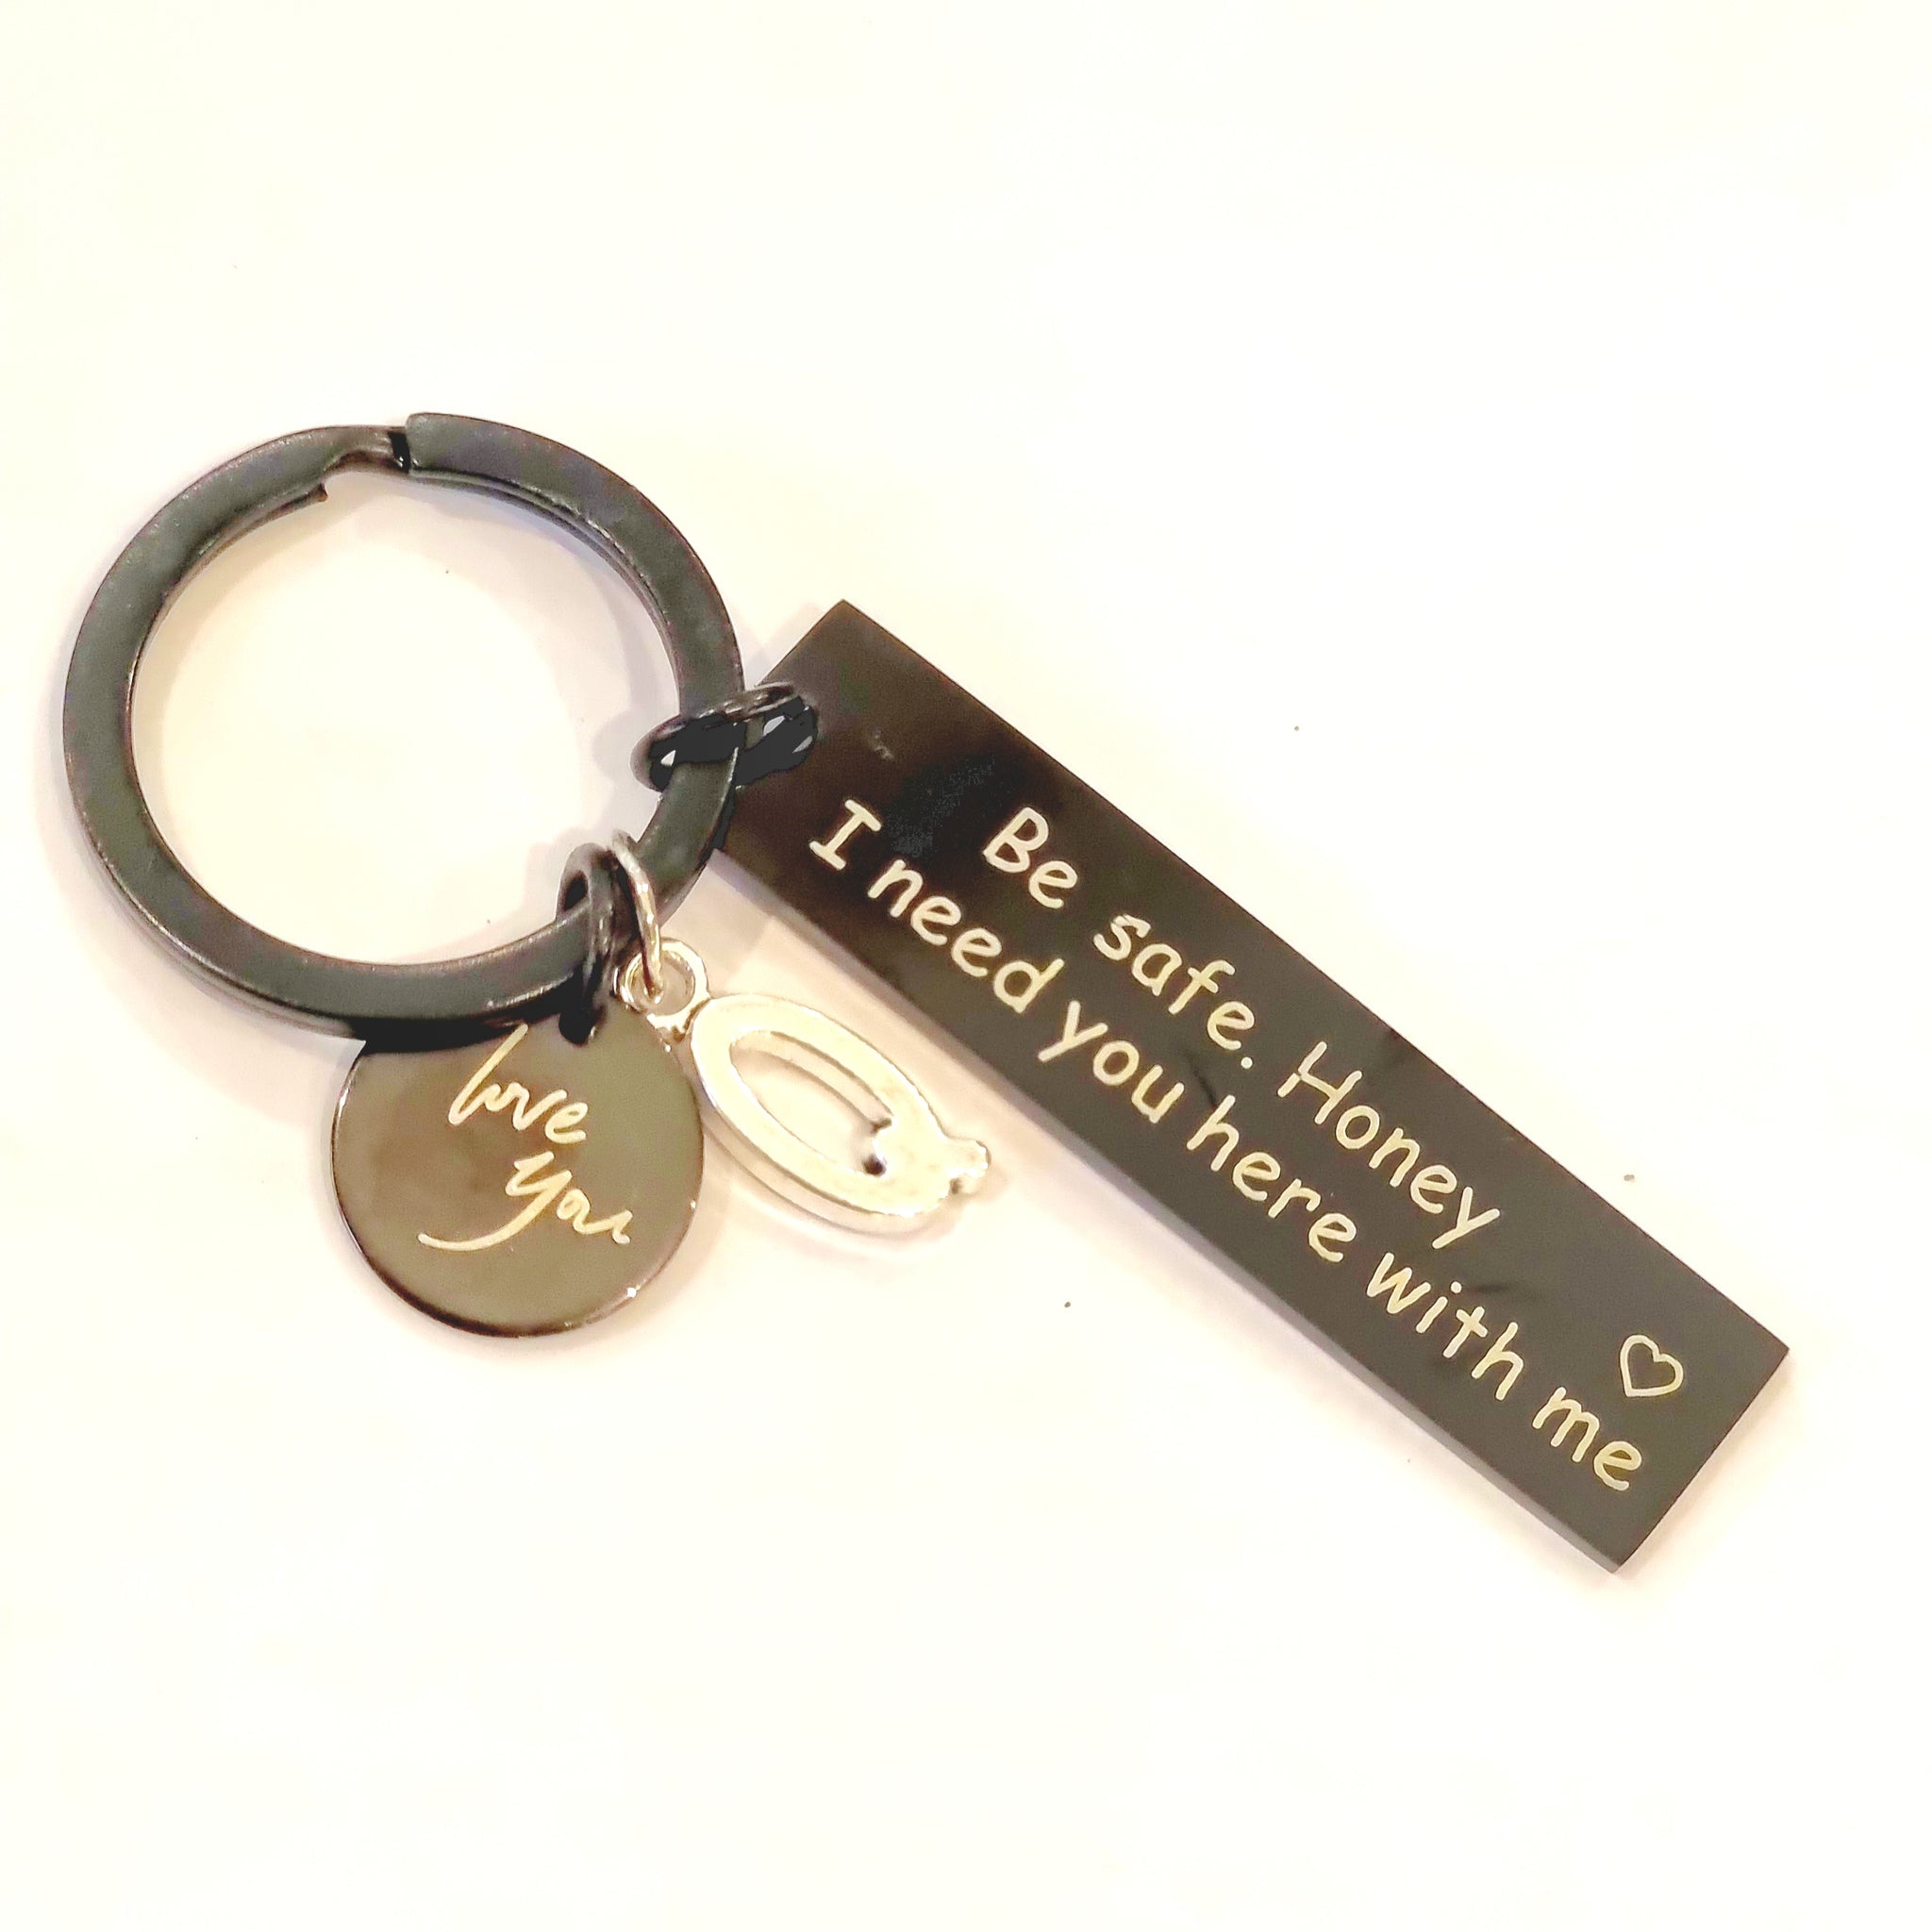 Be Safe Honey I Need You Here With Me Keychain-Black